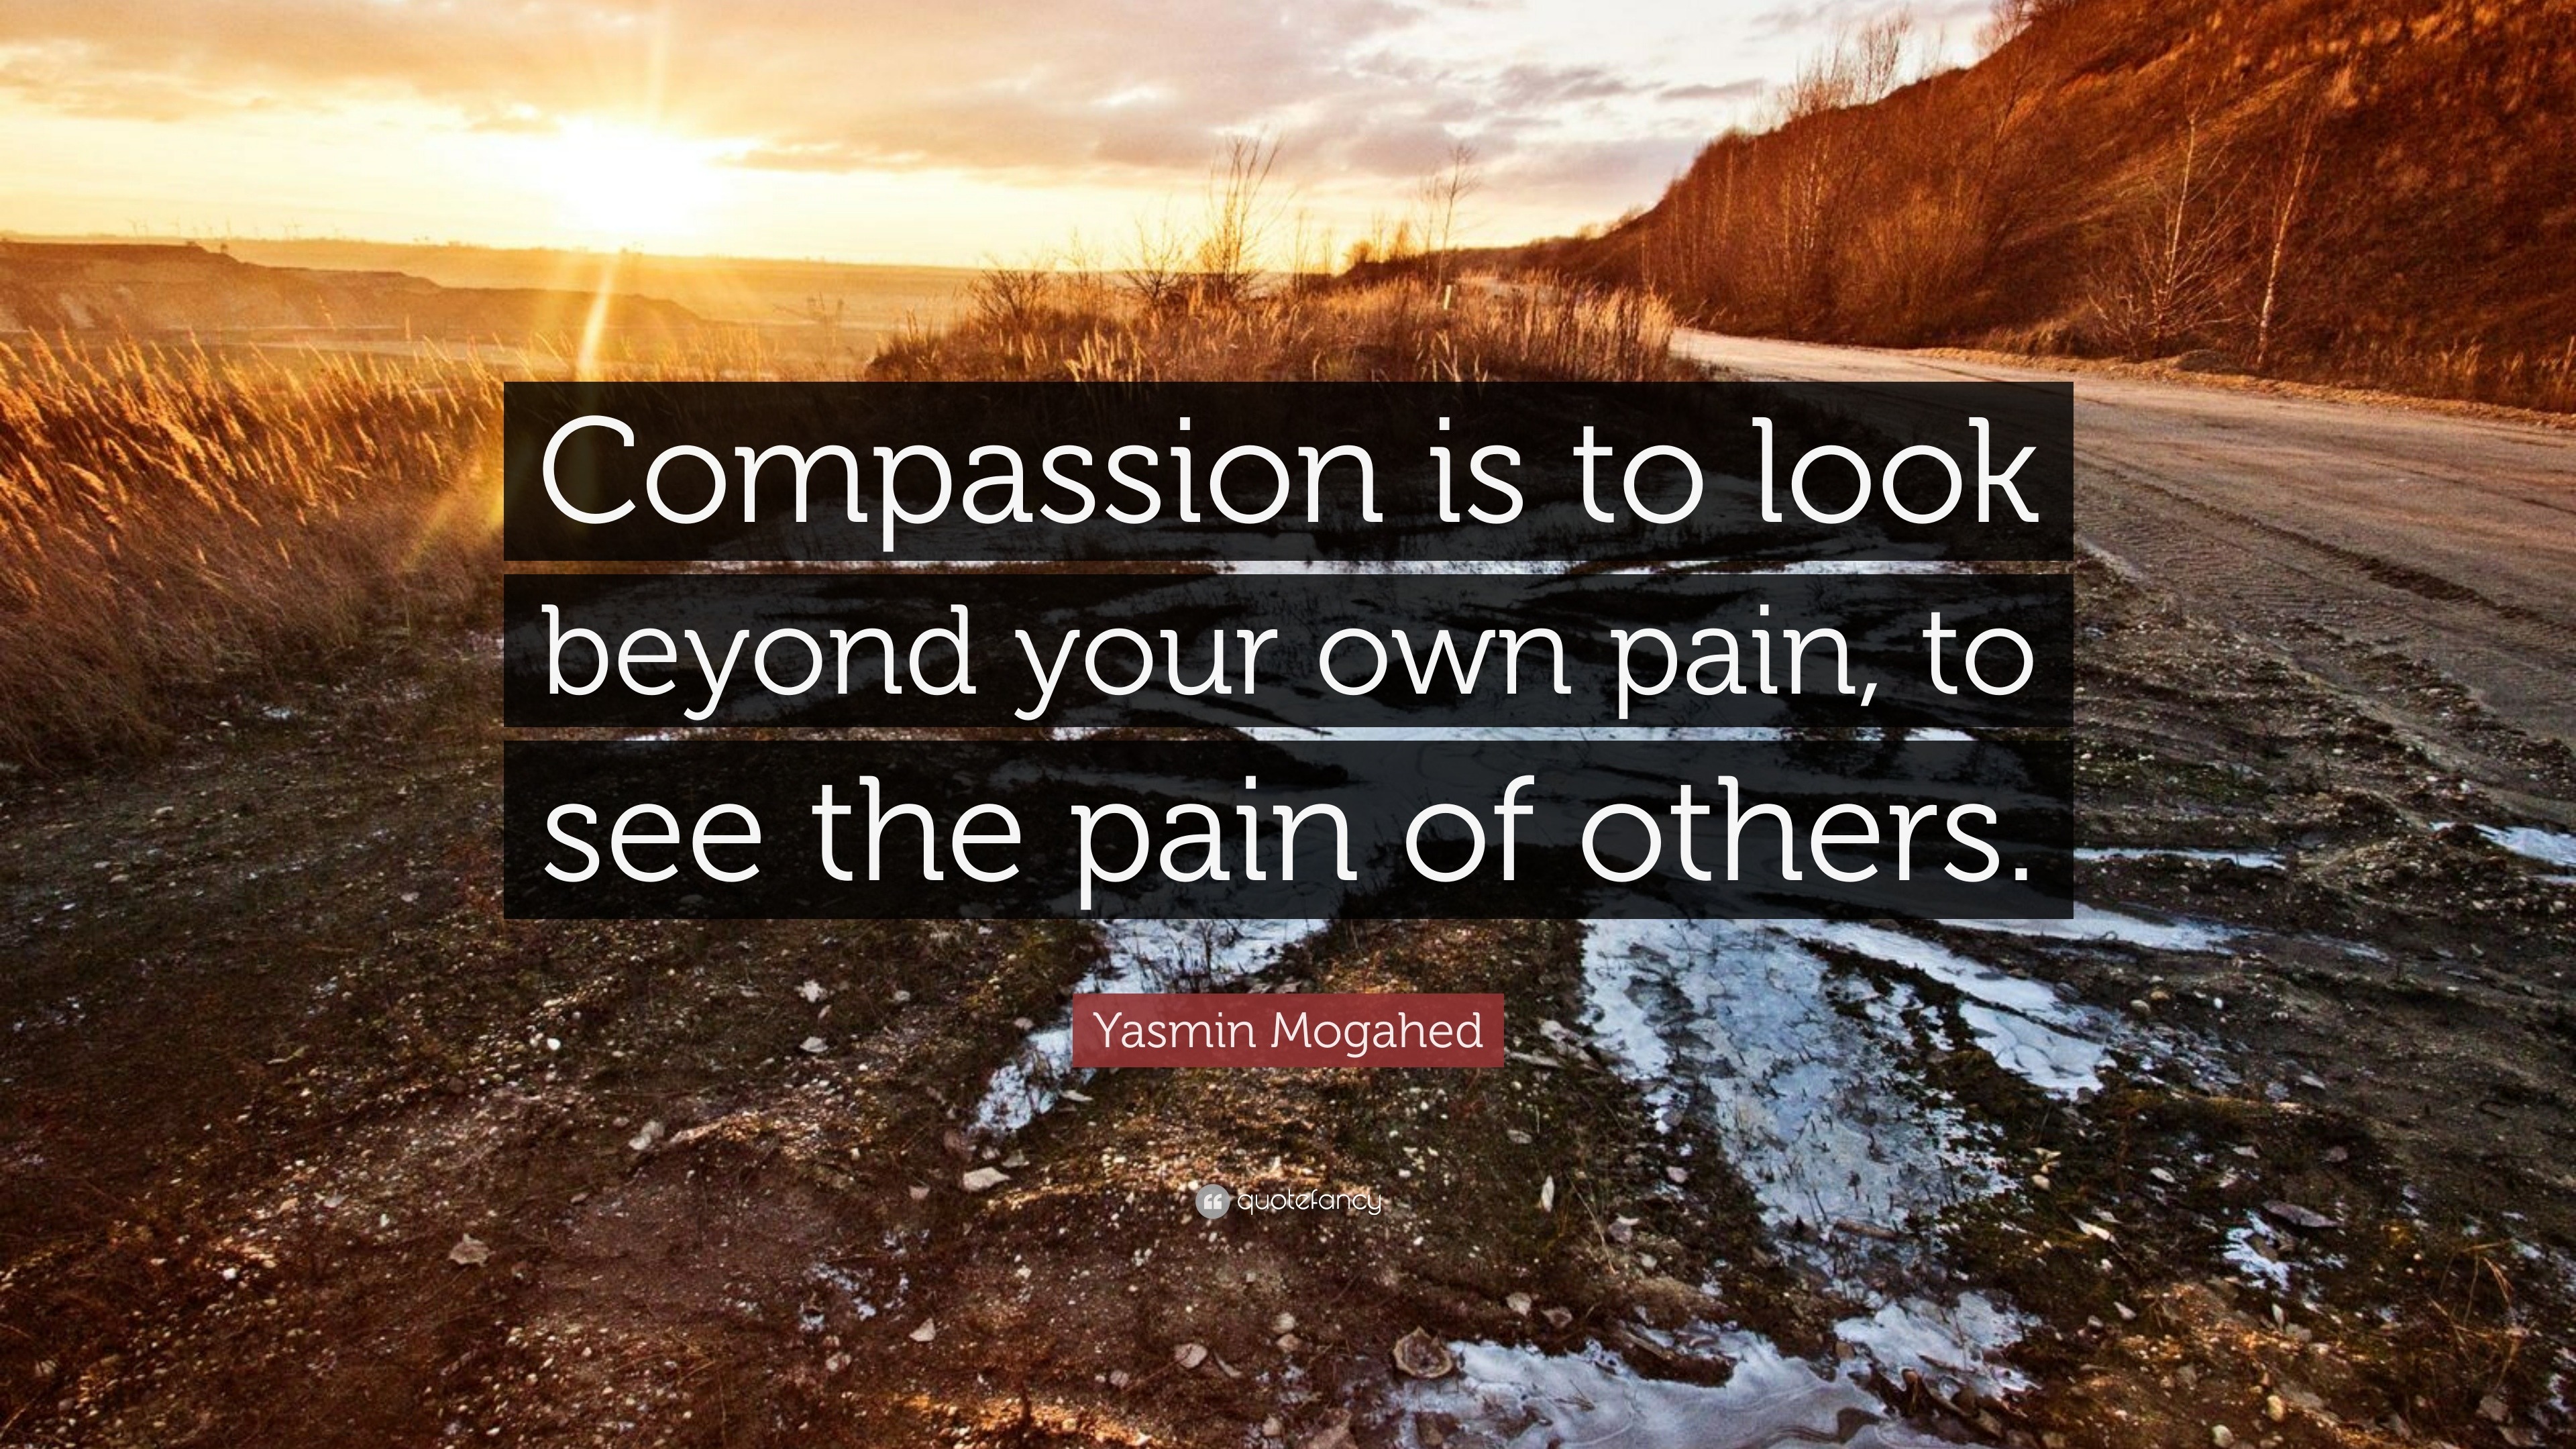 Yasmin Mogahed Quote: “Compassion is to look beyond your own pain, to ...